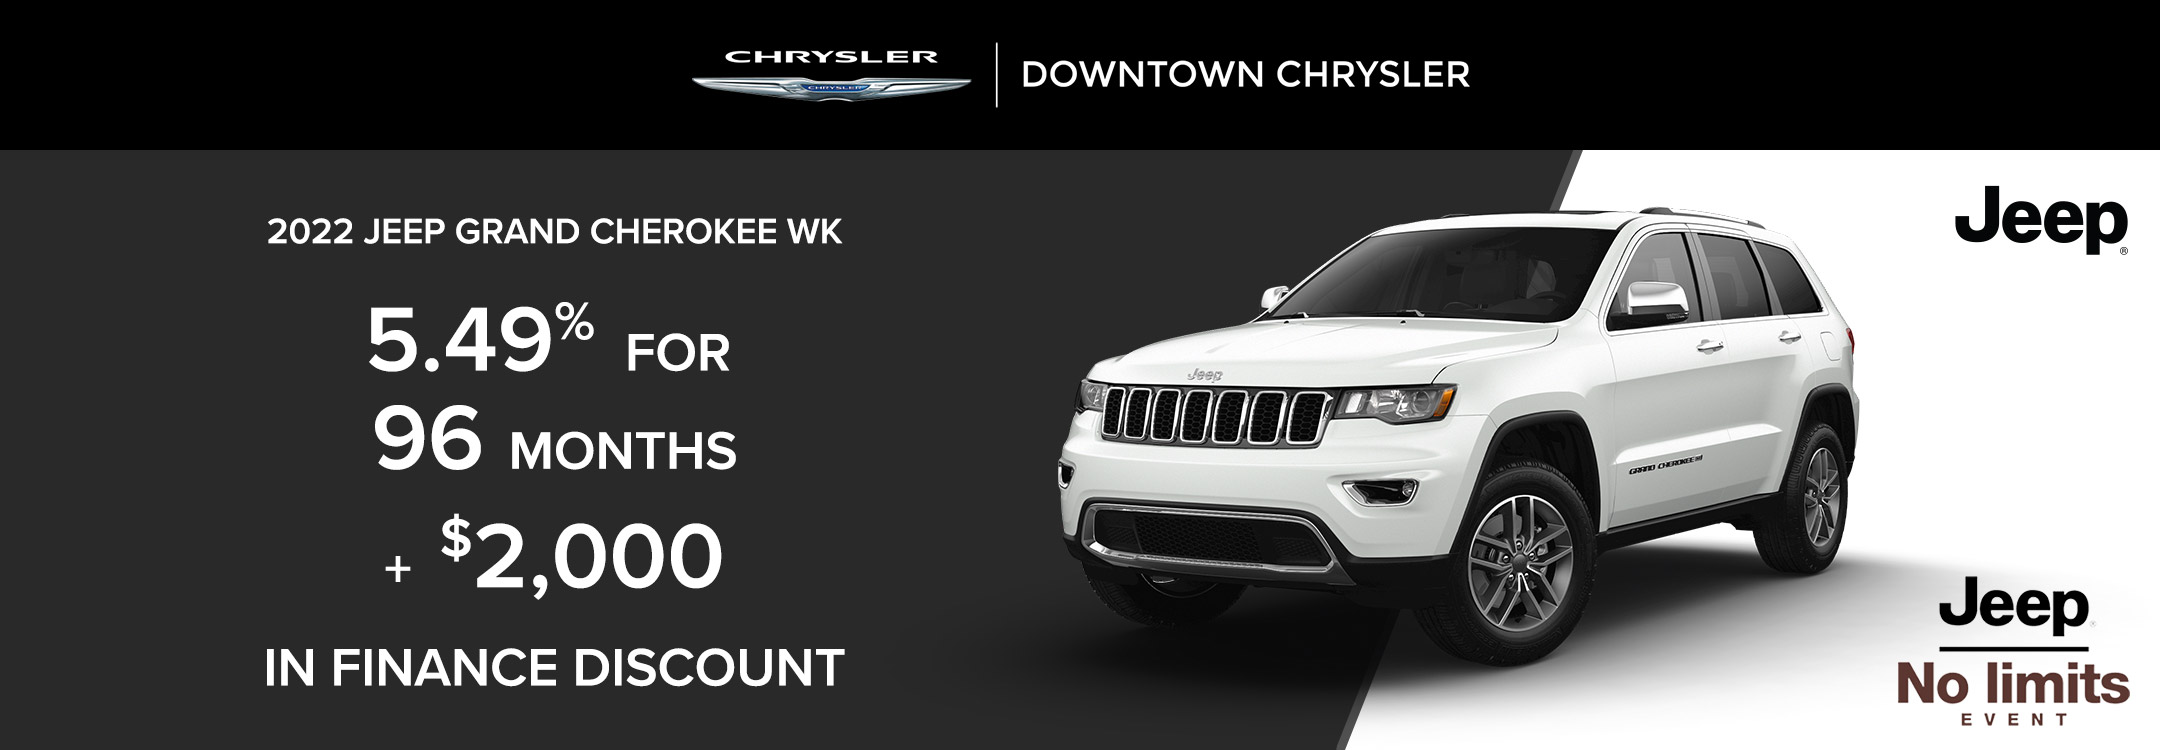 Downtown Chrysler Special Offers